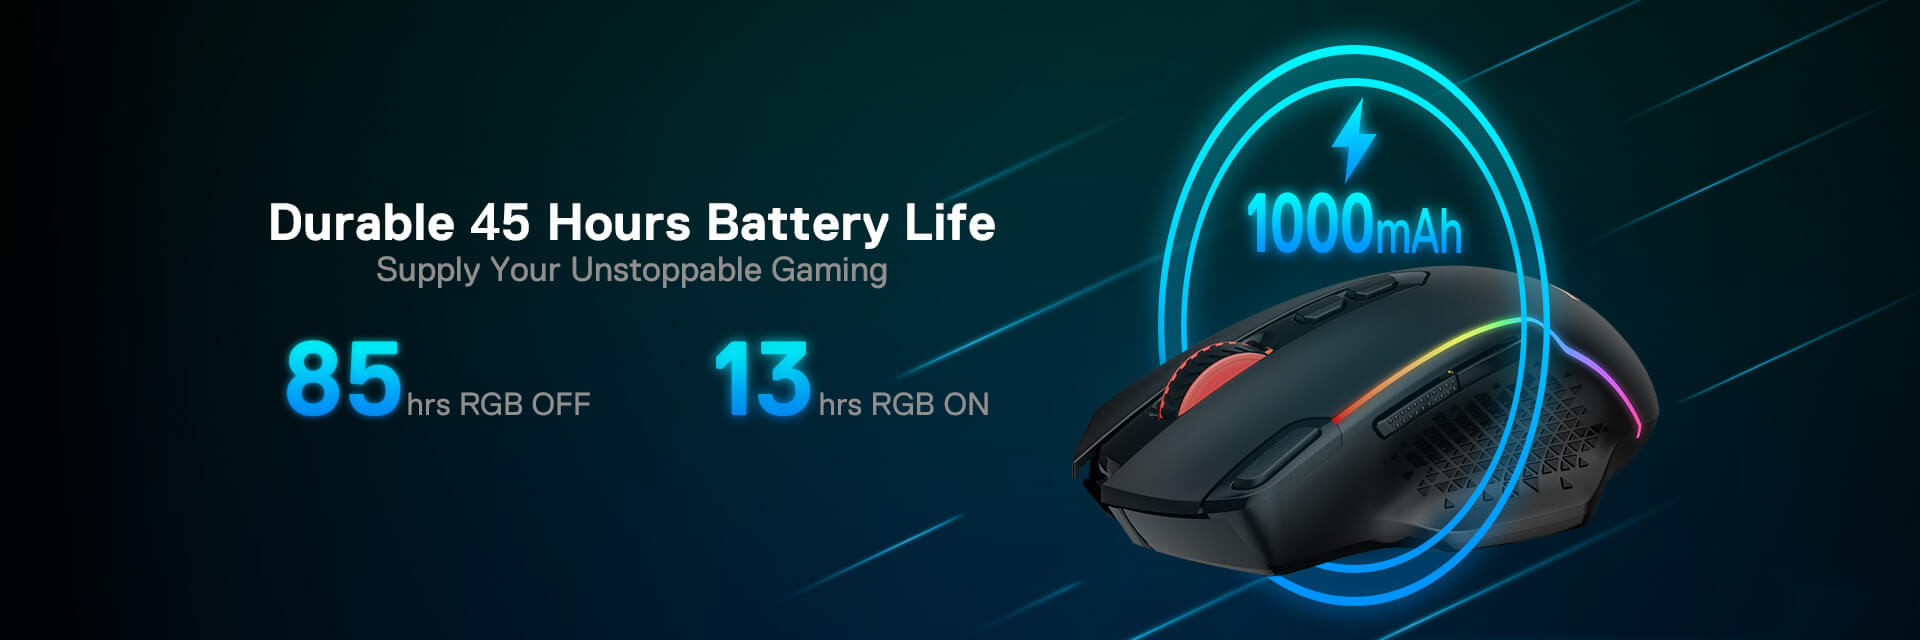 cheap wireless gaming mouse